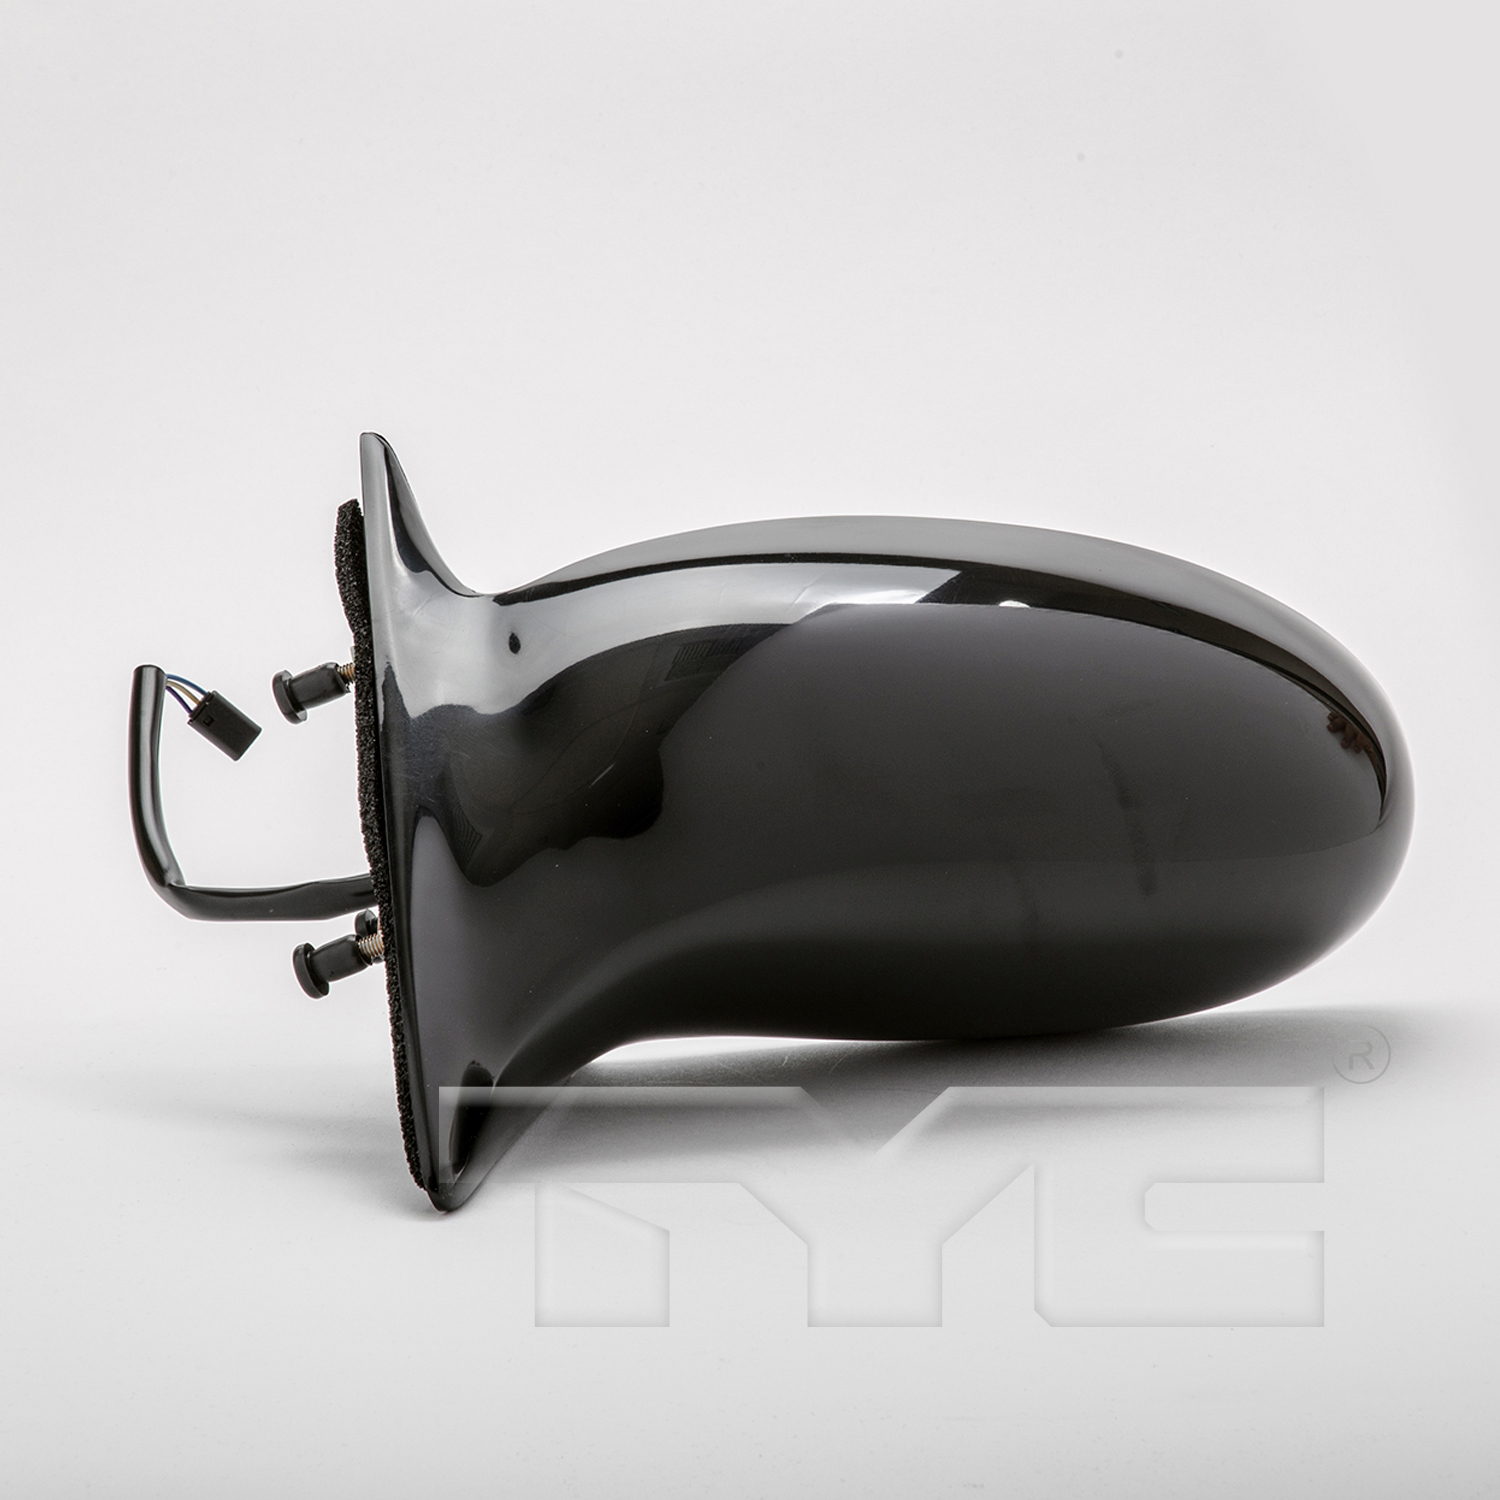 Aftermarket MIRRORS for PONTIAC - GRAND AM, GRAND AM,02-05,LT Mirror outside rear view